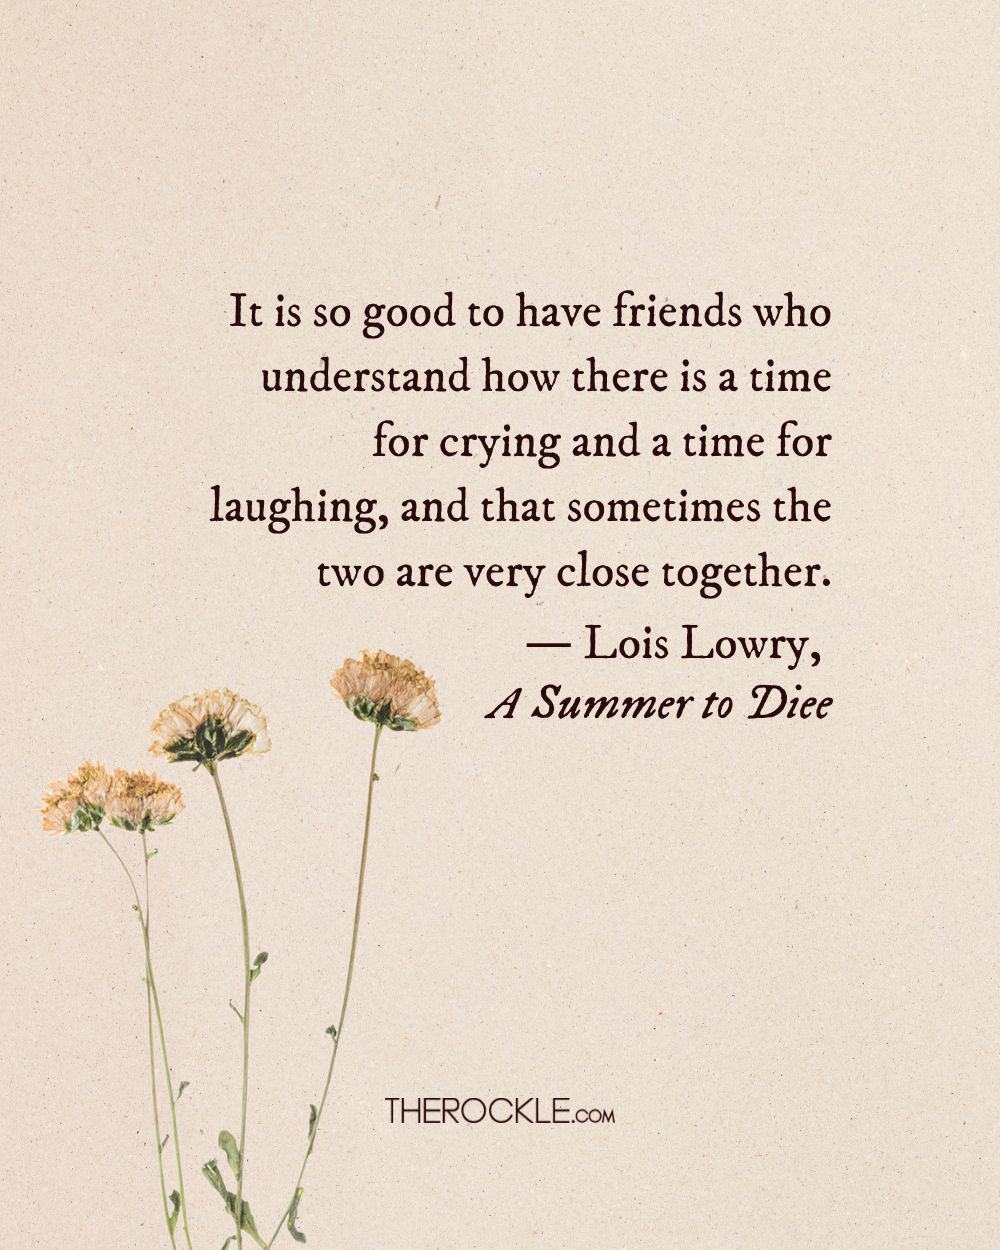 Lois Lowry on friends' emotional support